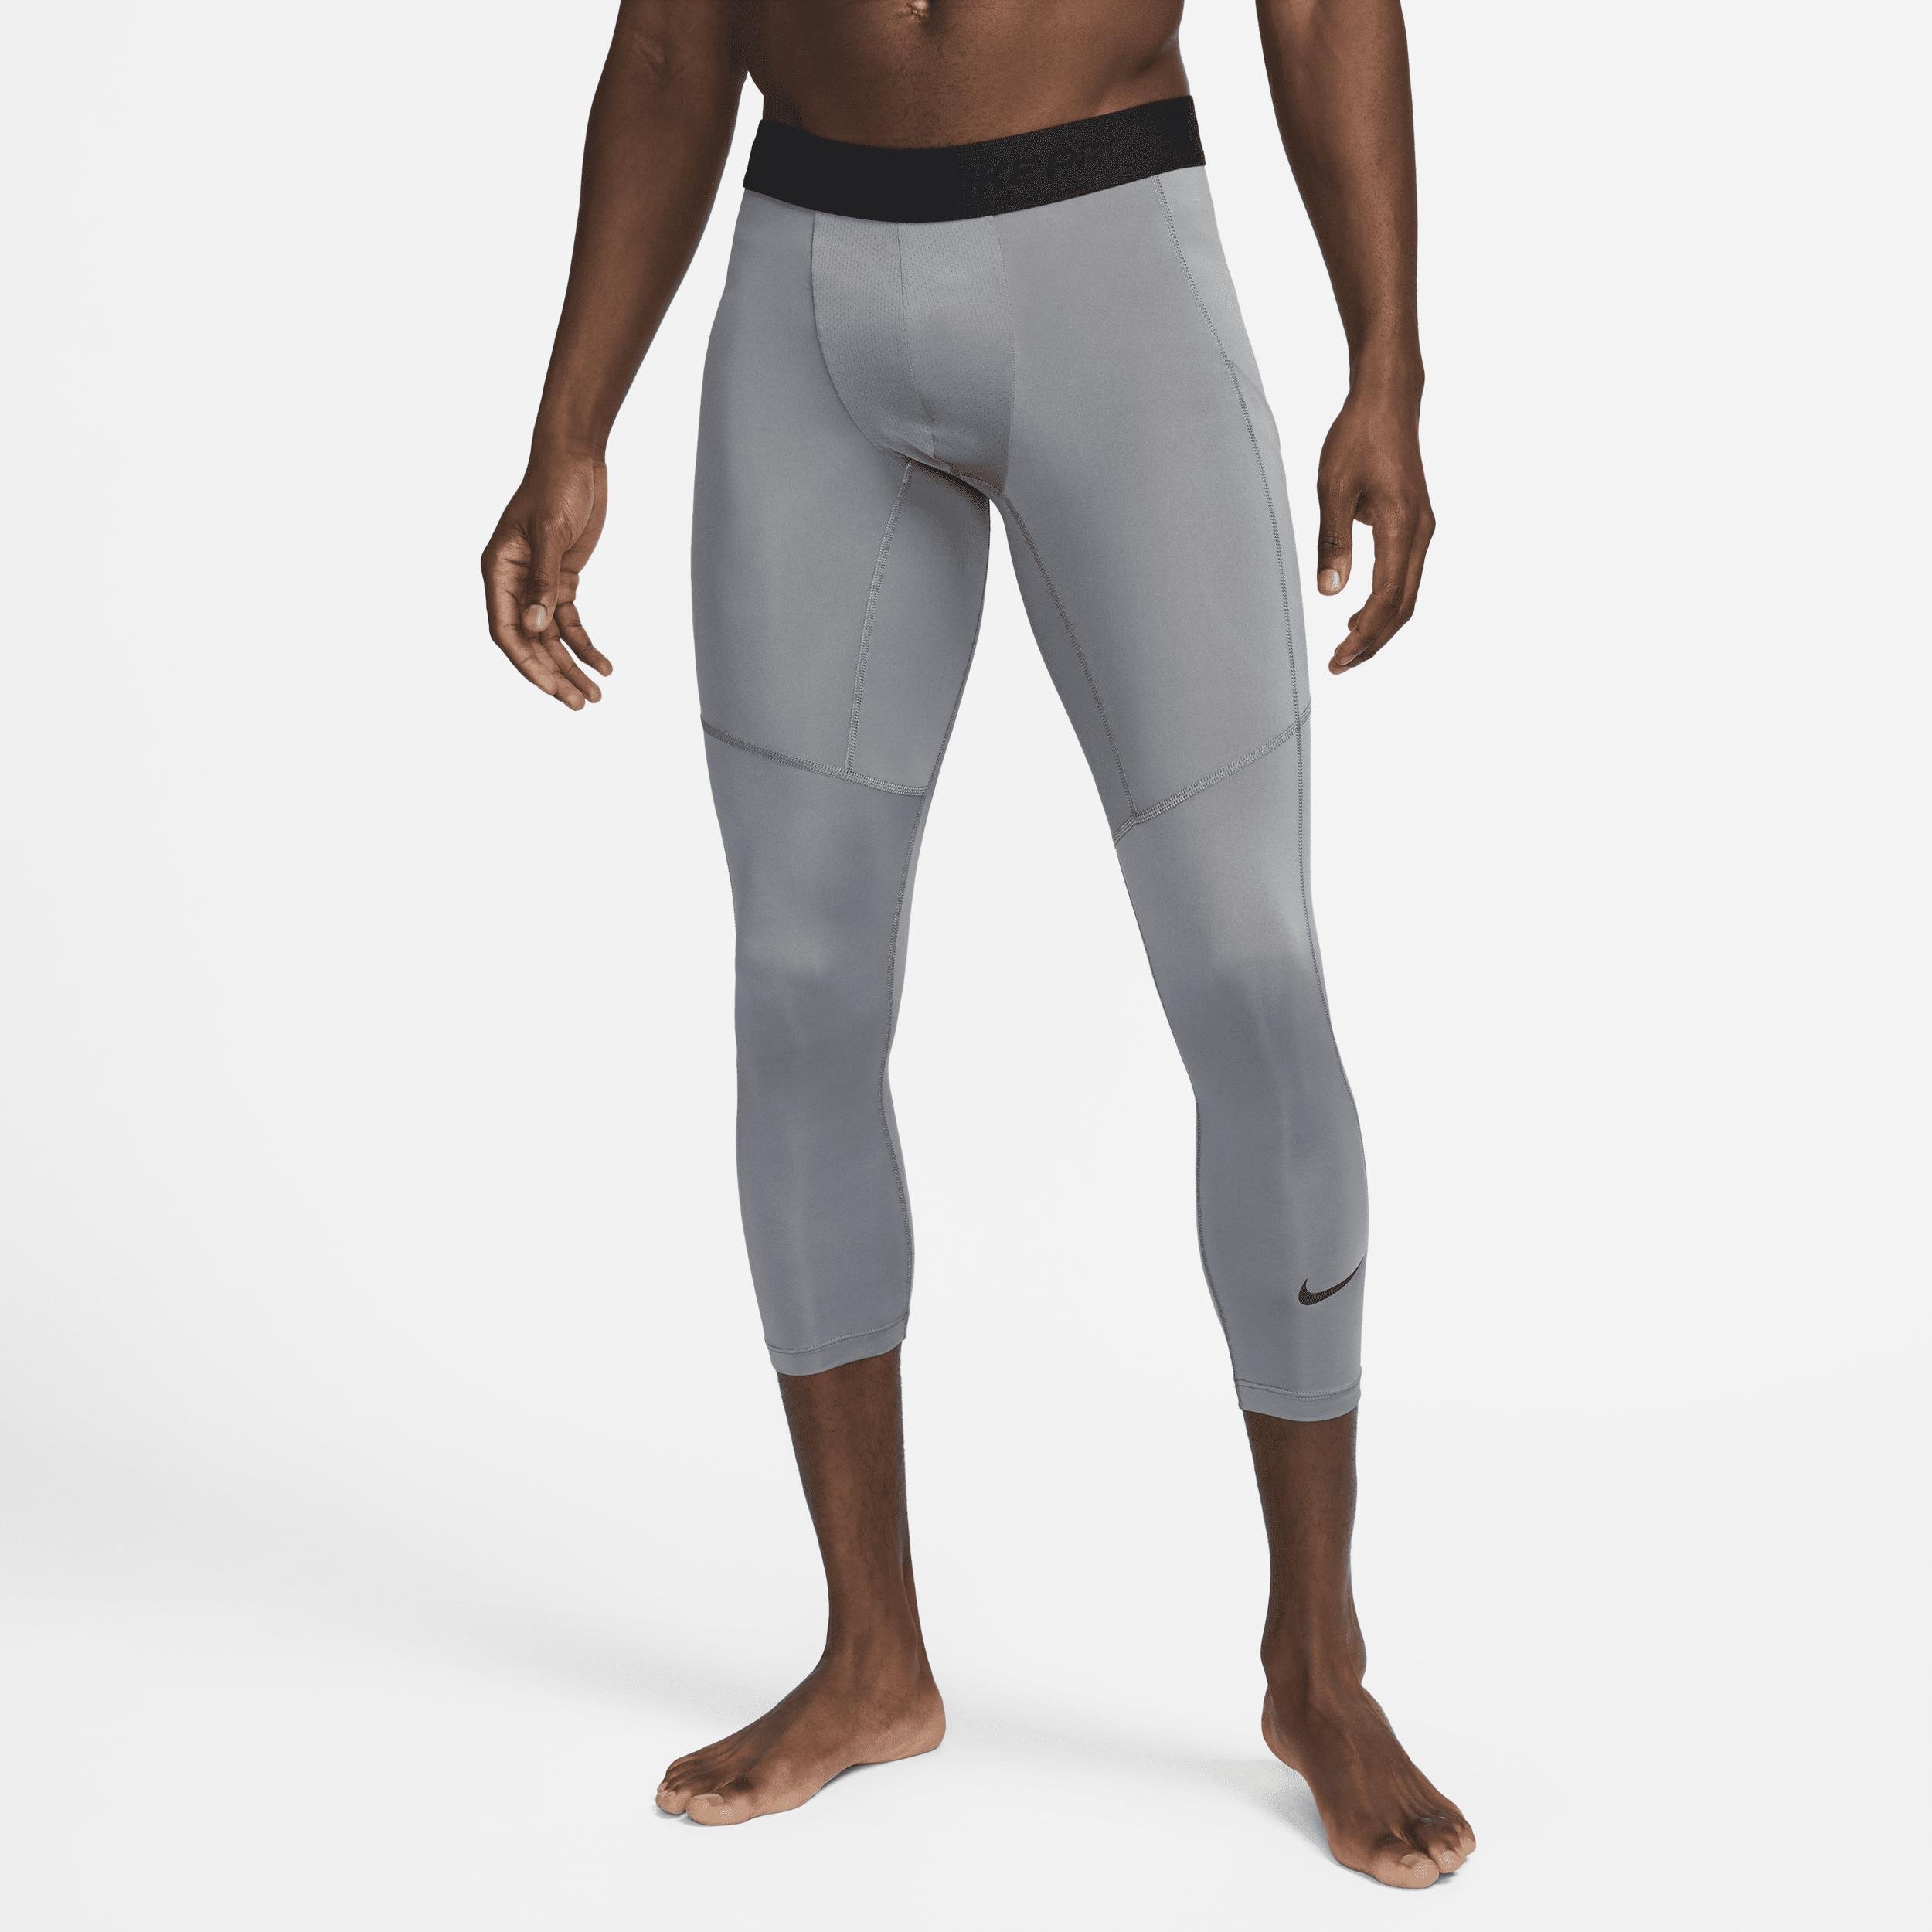 Men's Nike Pro Dri-FIT 3/4-Length Fitness Tights by NIKE